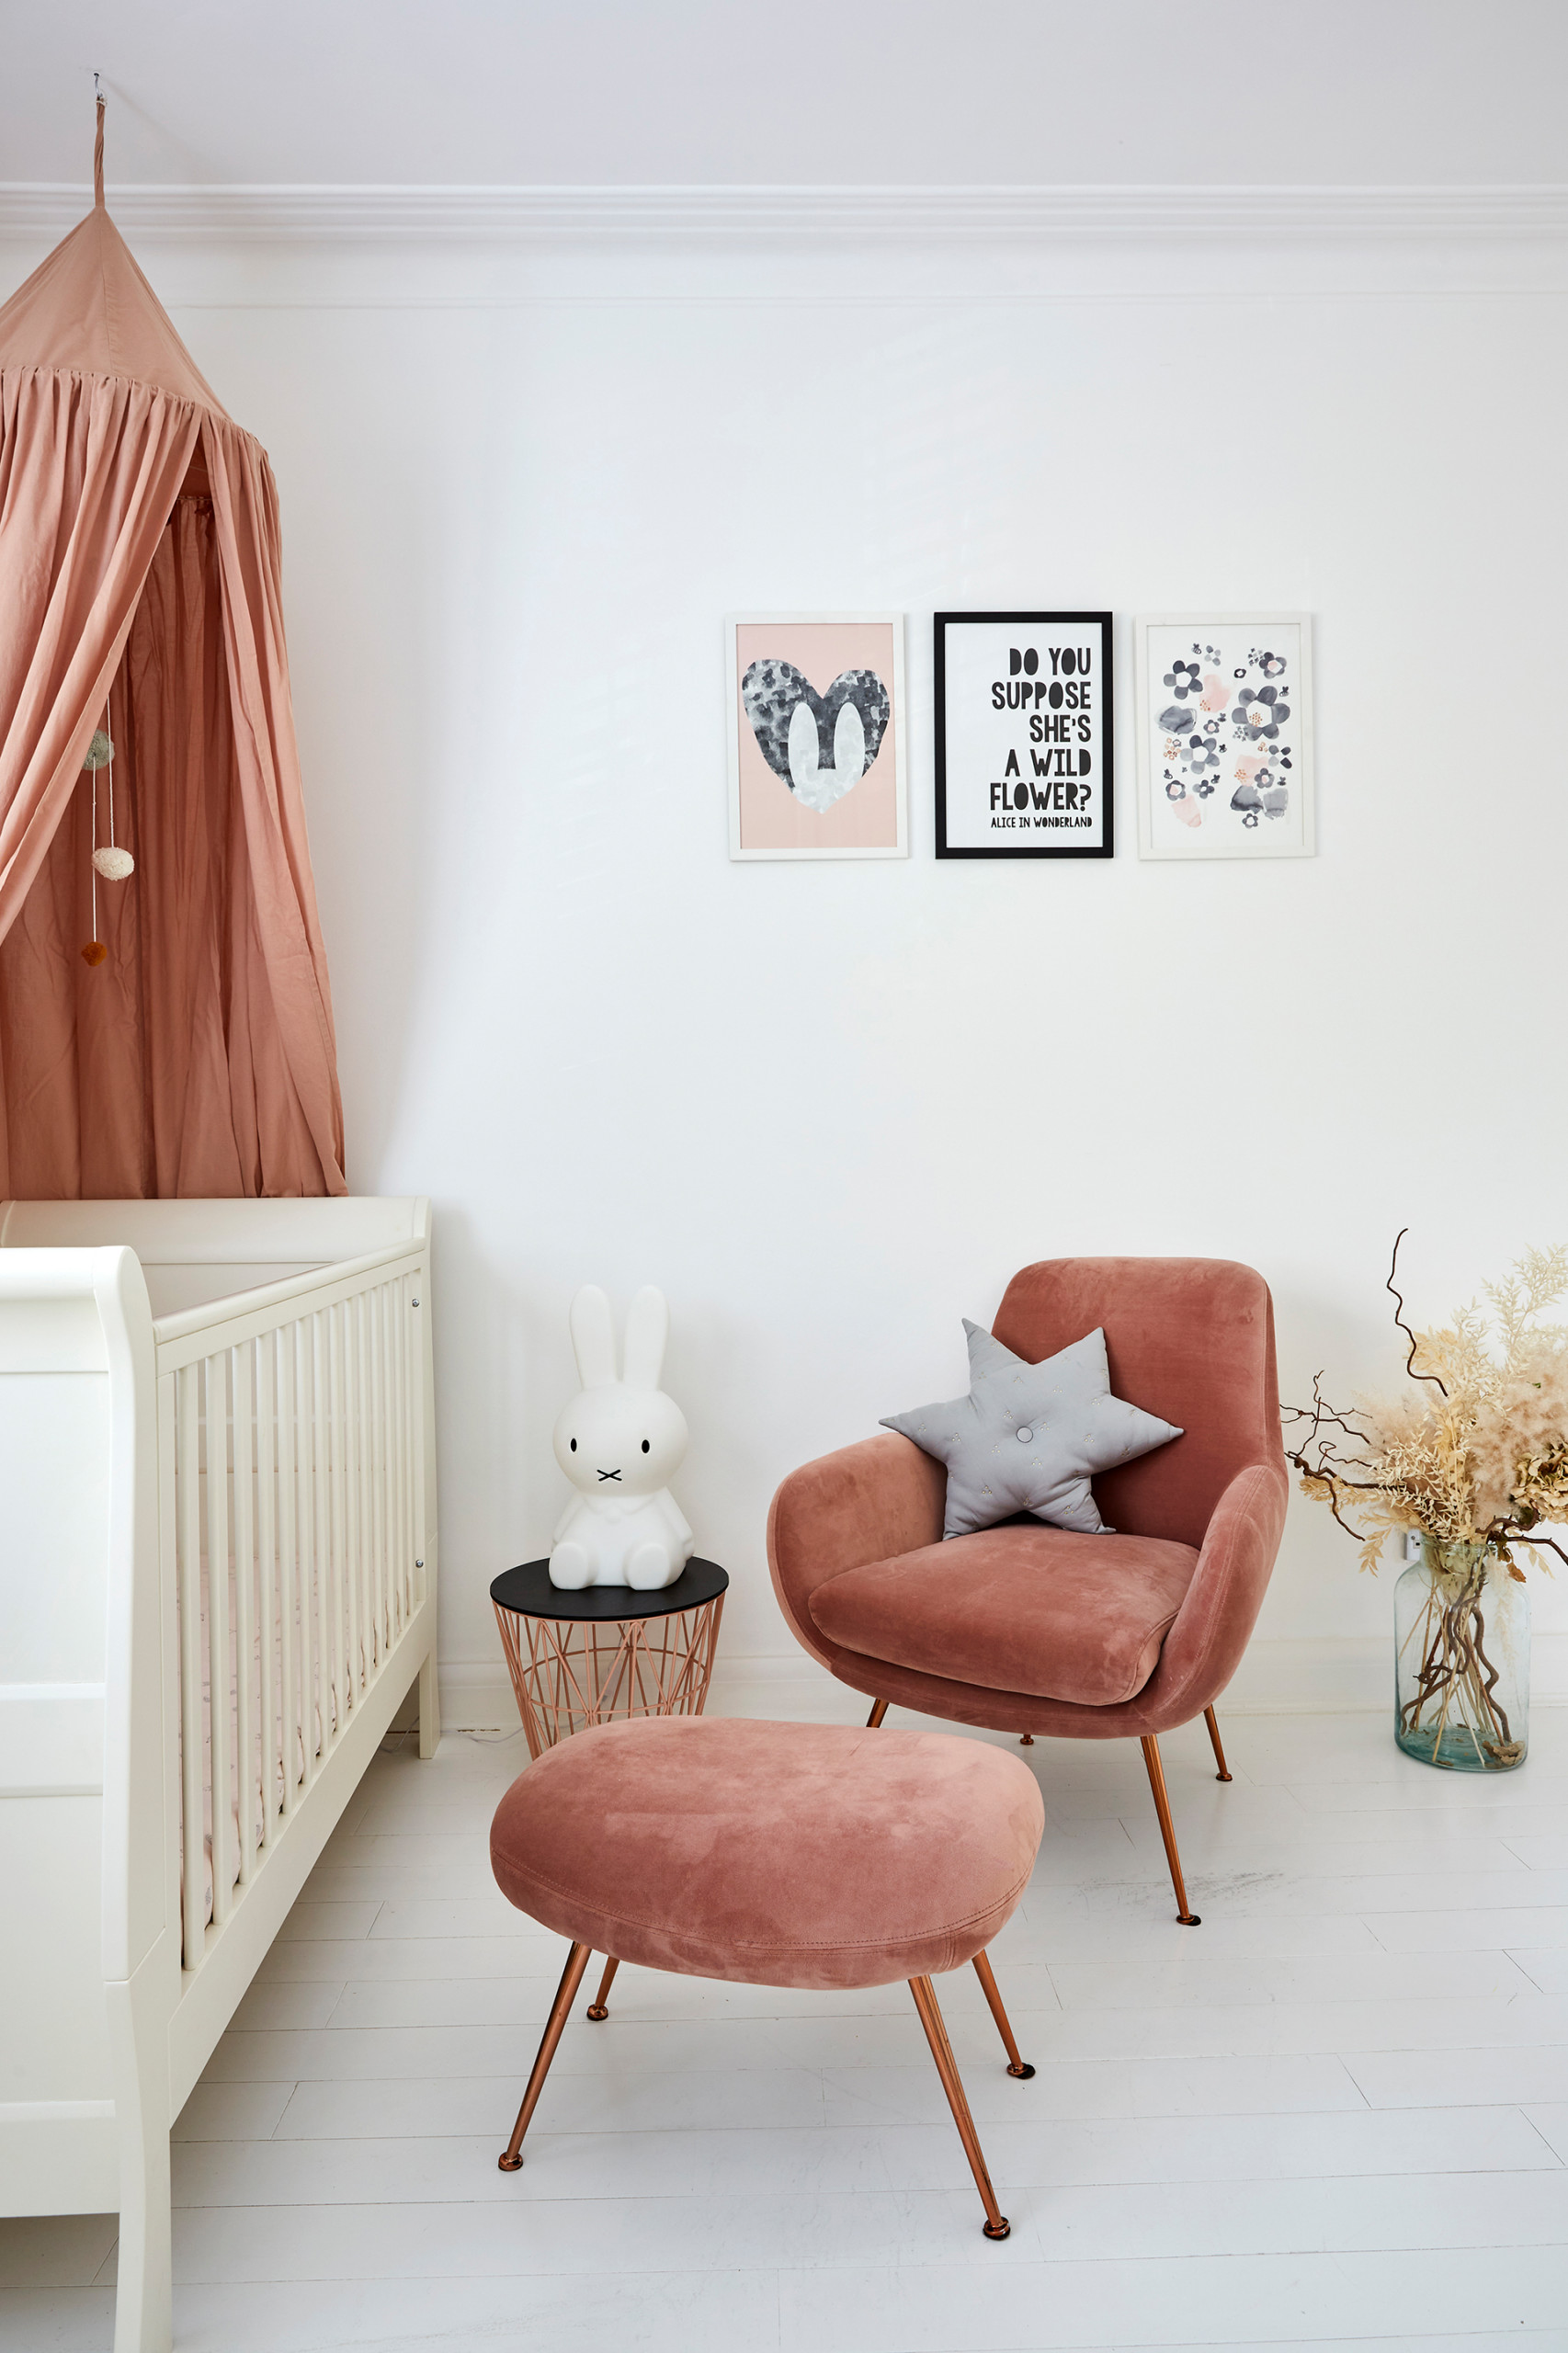 18 Transitional Nursery Interior Design Ideas for the Stylish and Practical Parent